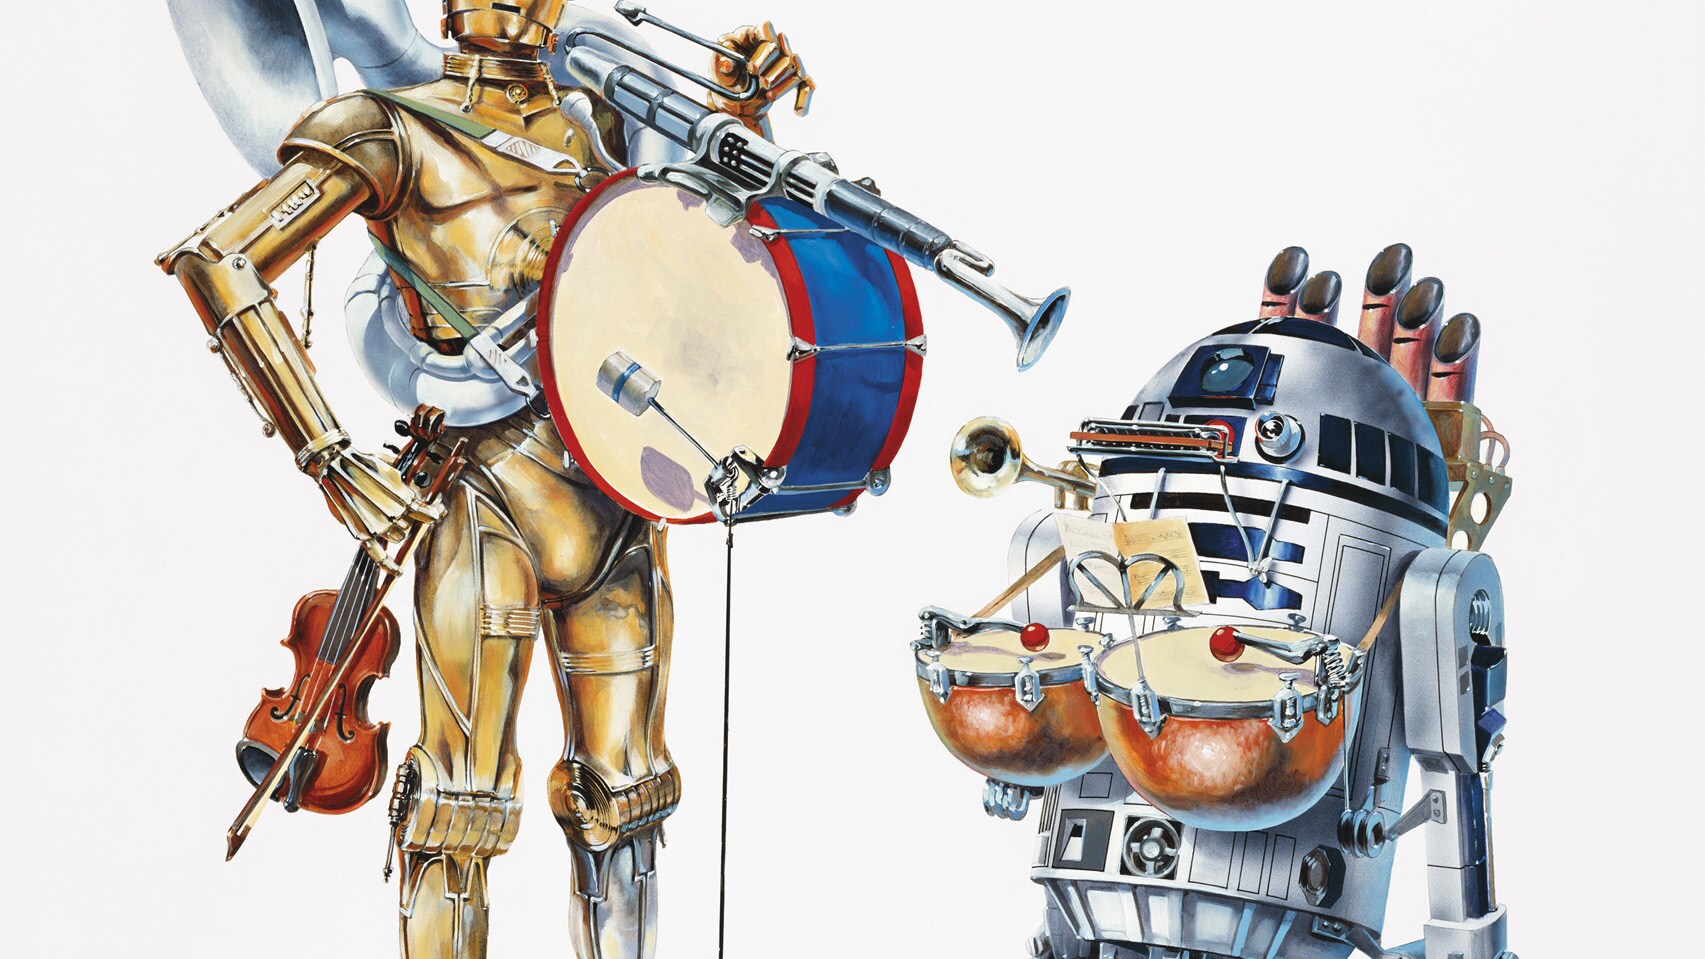 Star Wars Art: Posters - C-3PO and R2-D2 with instruments